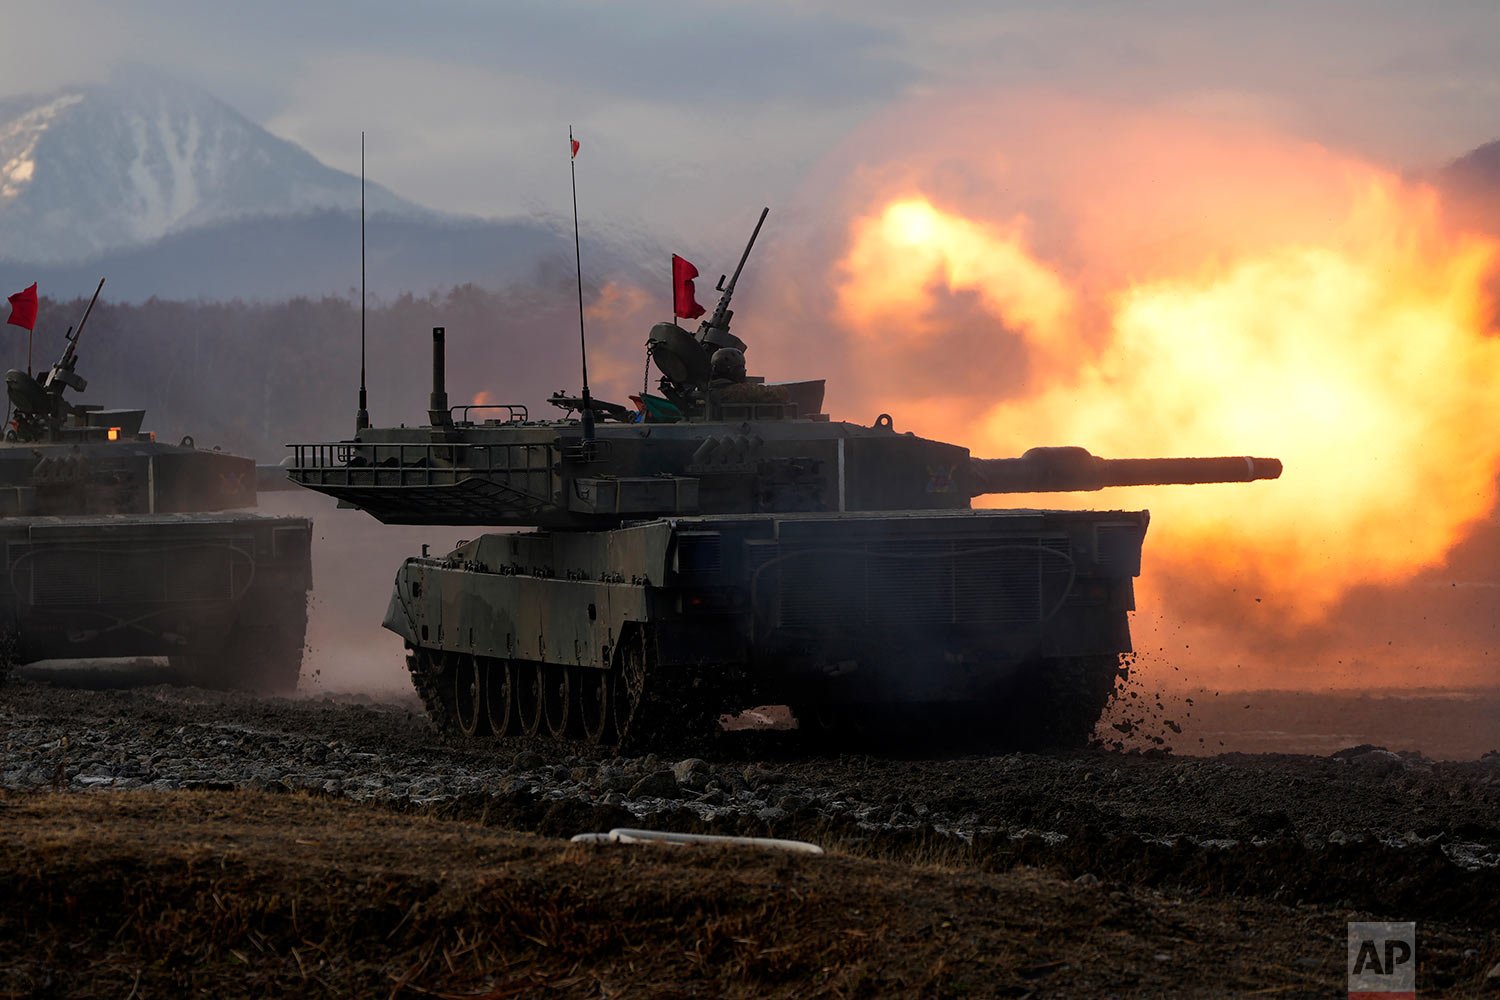  Japanese Ground-Self Defense Force (JGDDF) Type 90 tank fires its gun at a target during an annual drill exercise at the Minami Eniwa Camp Tuesday, Dec. 7, 2021, in Eniwa, Japan's northern island of Hokkaido. (AP Photo/Eugene Hoshiko) 